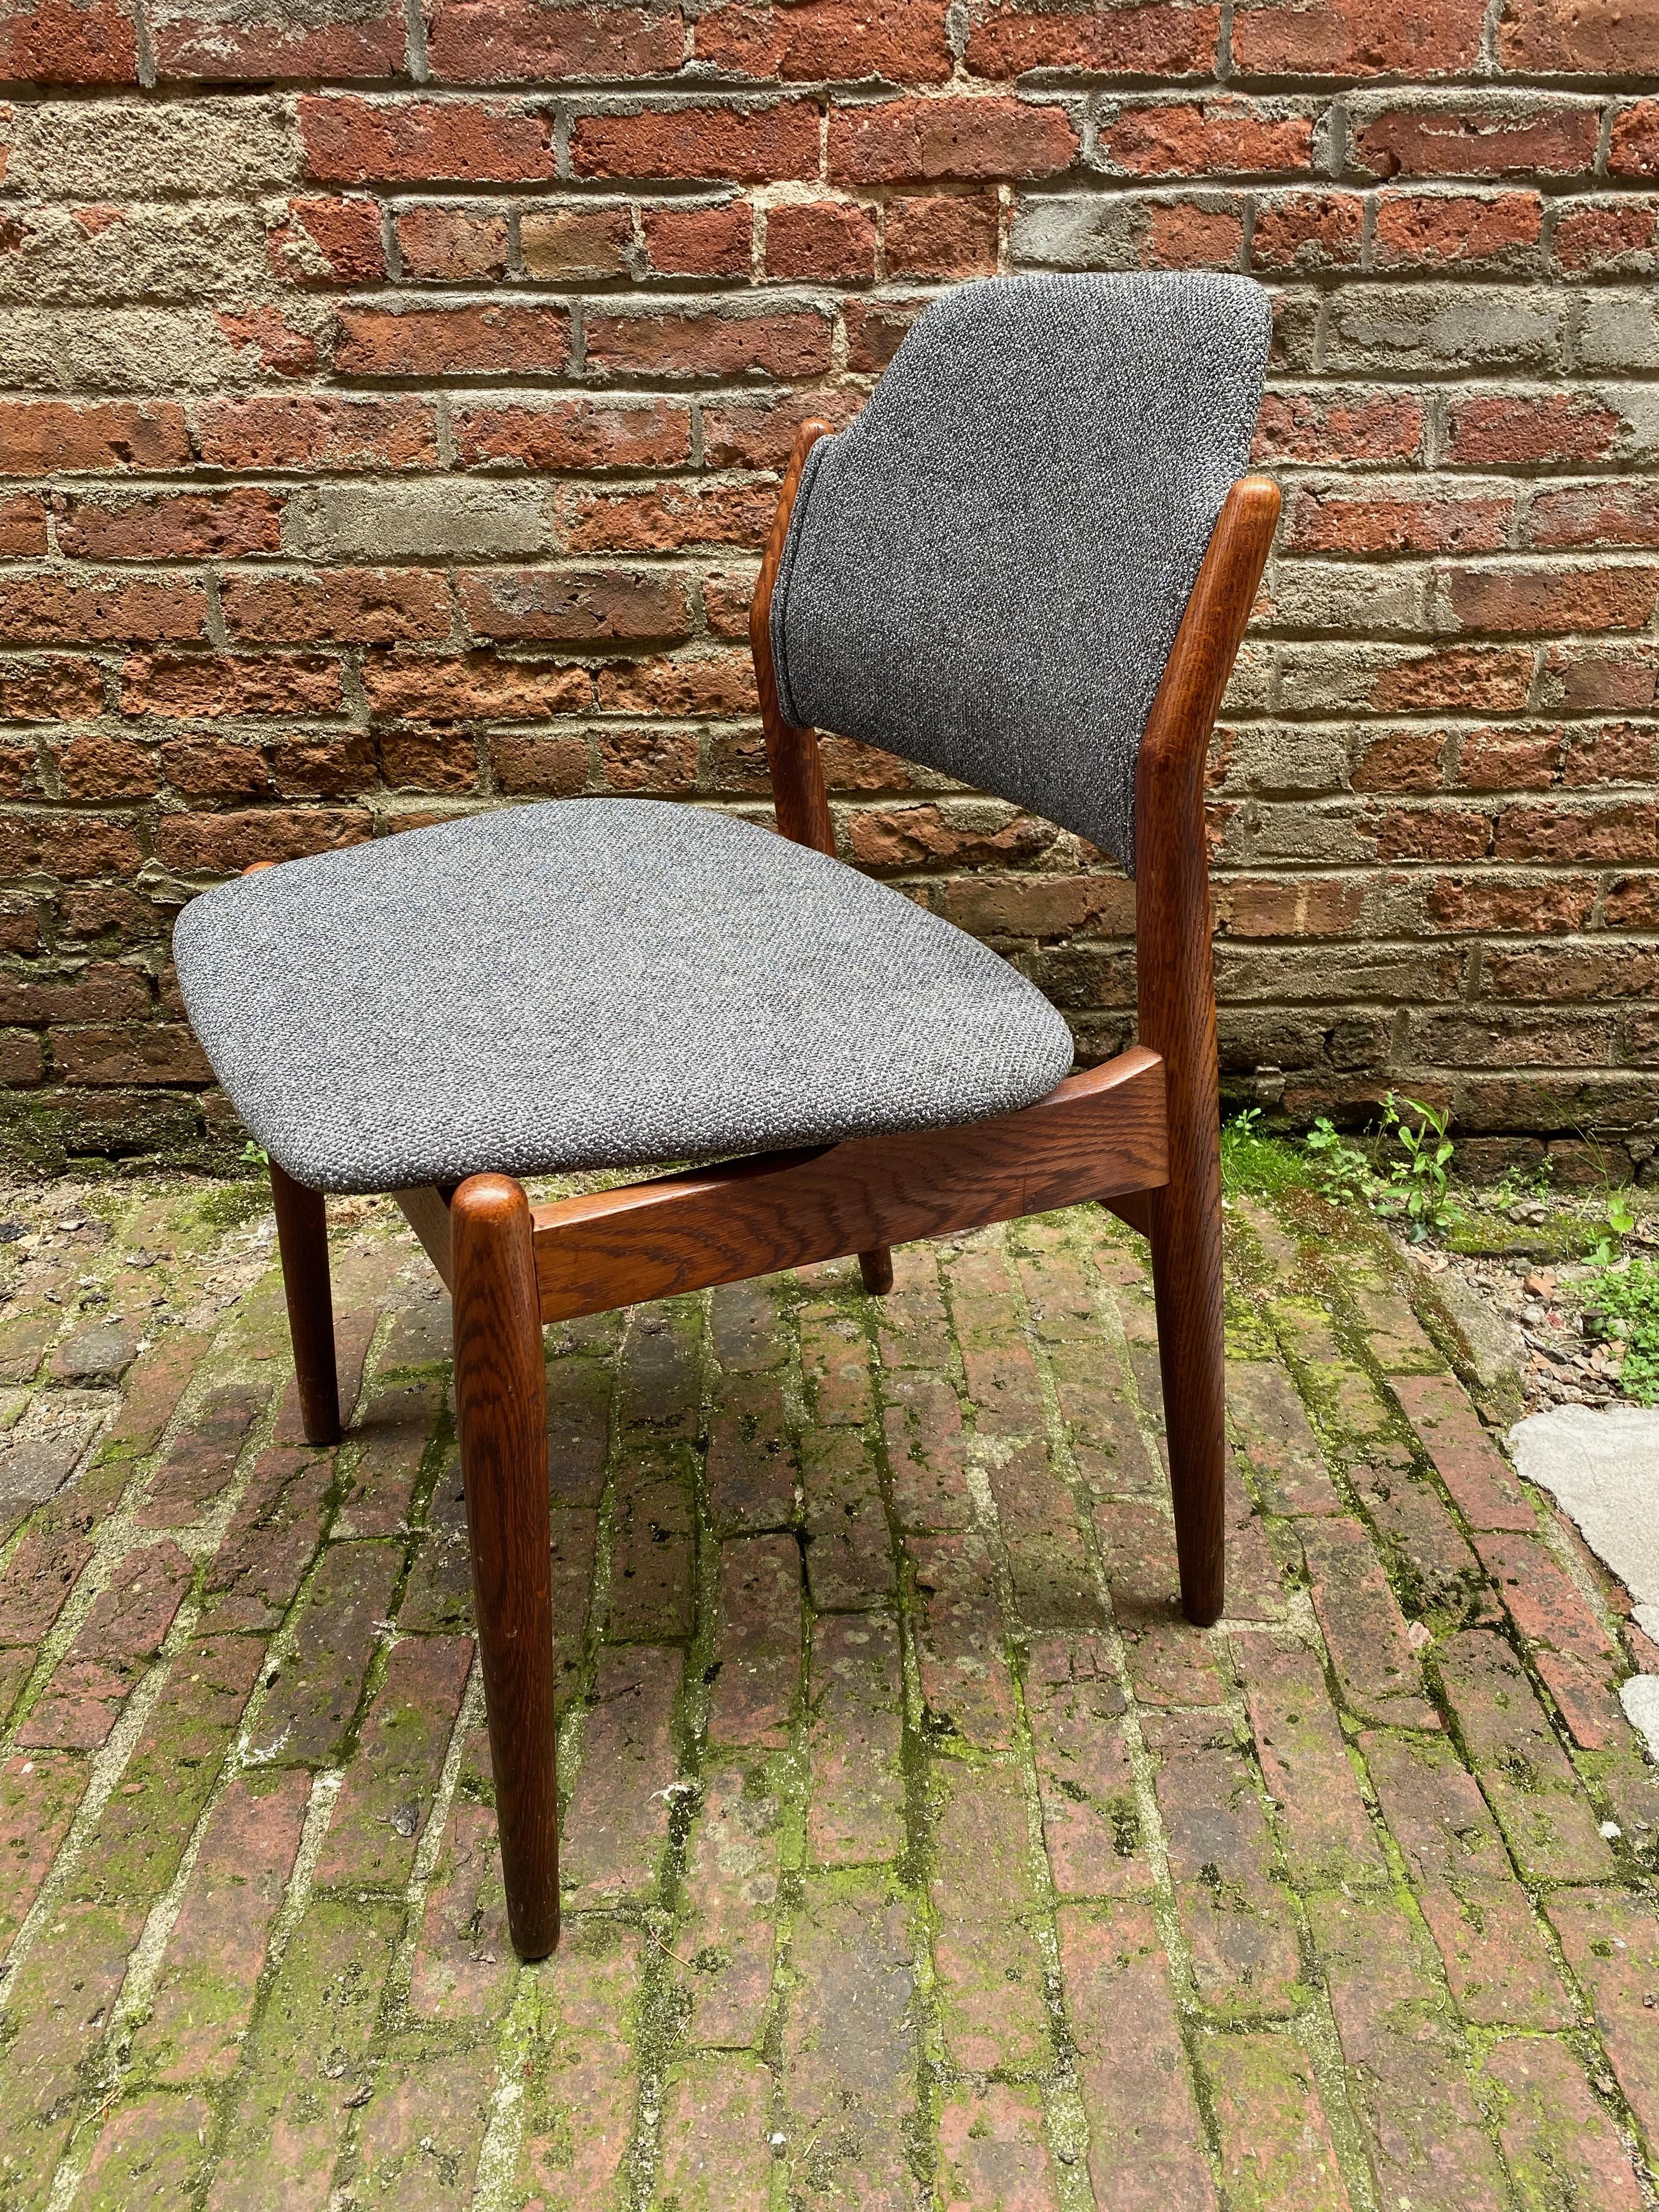 Arne Vodder for Sibast Møbler model #62 oak side chair. Solid oak frame with newly upholstered nubby gray fabric. Structurally sound and sturdy chair. Signed under the seat, Made in Denmark, George Tanier Selection, Sibast Mobler. 

Measures: